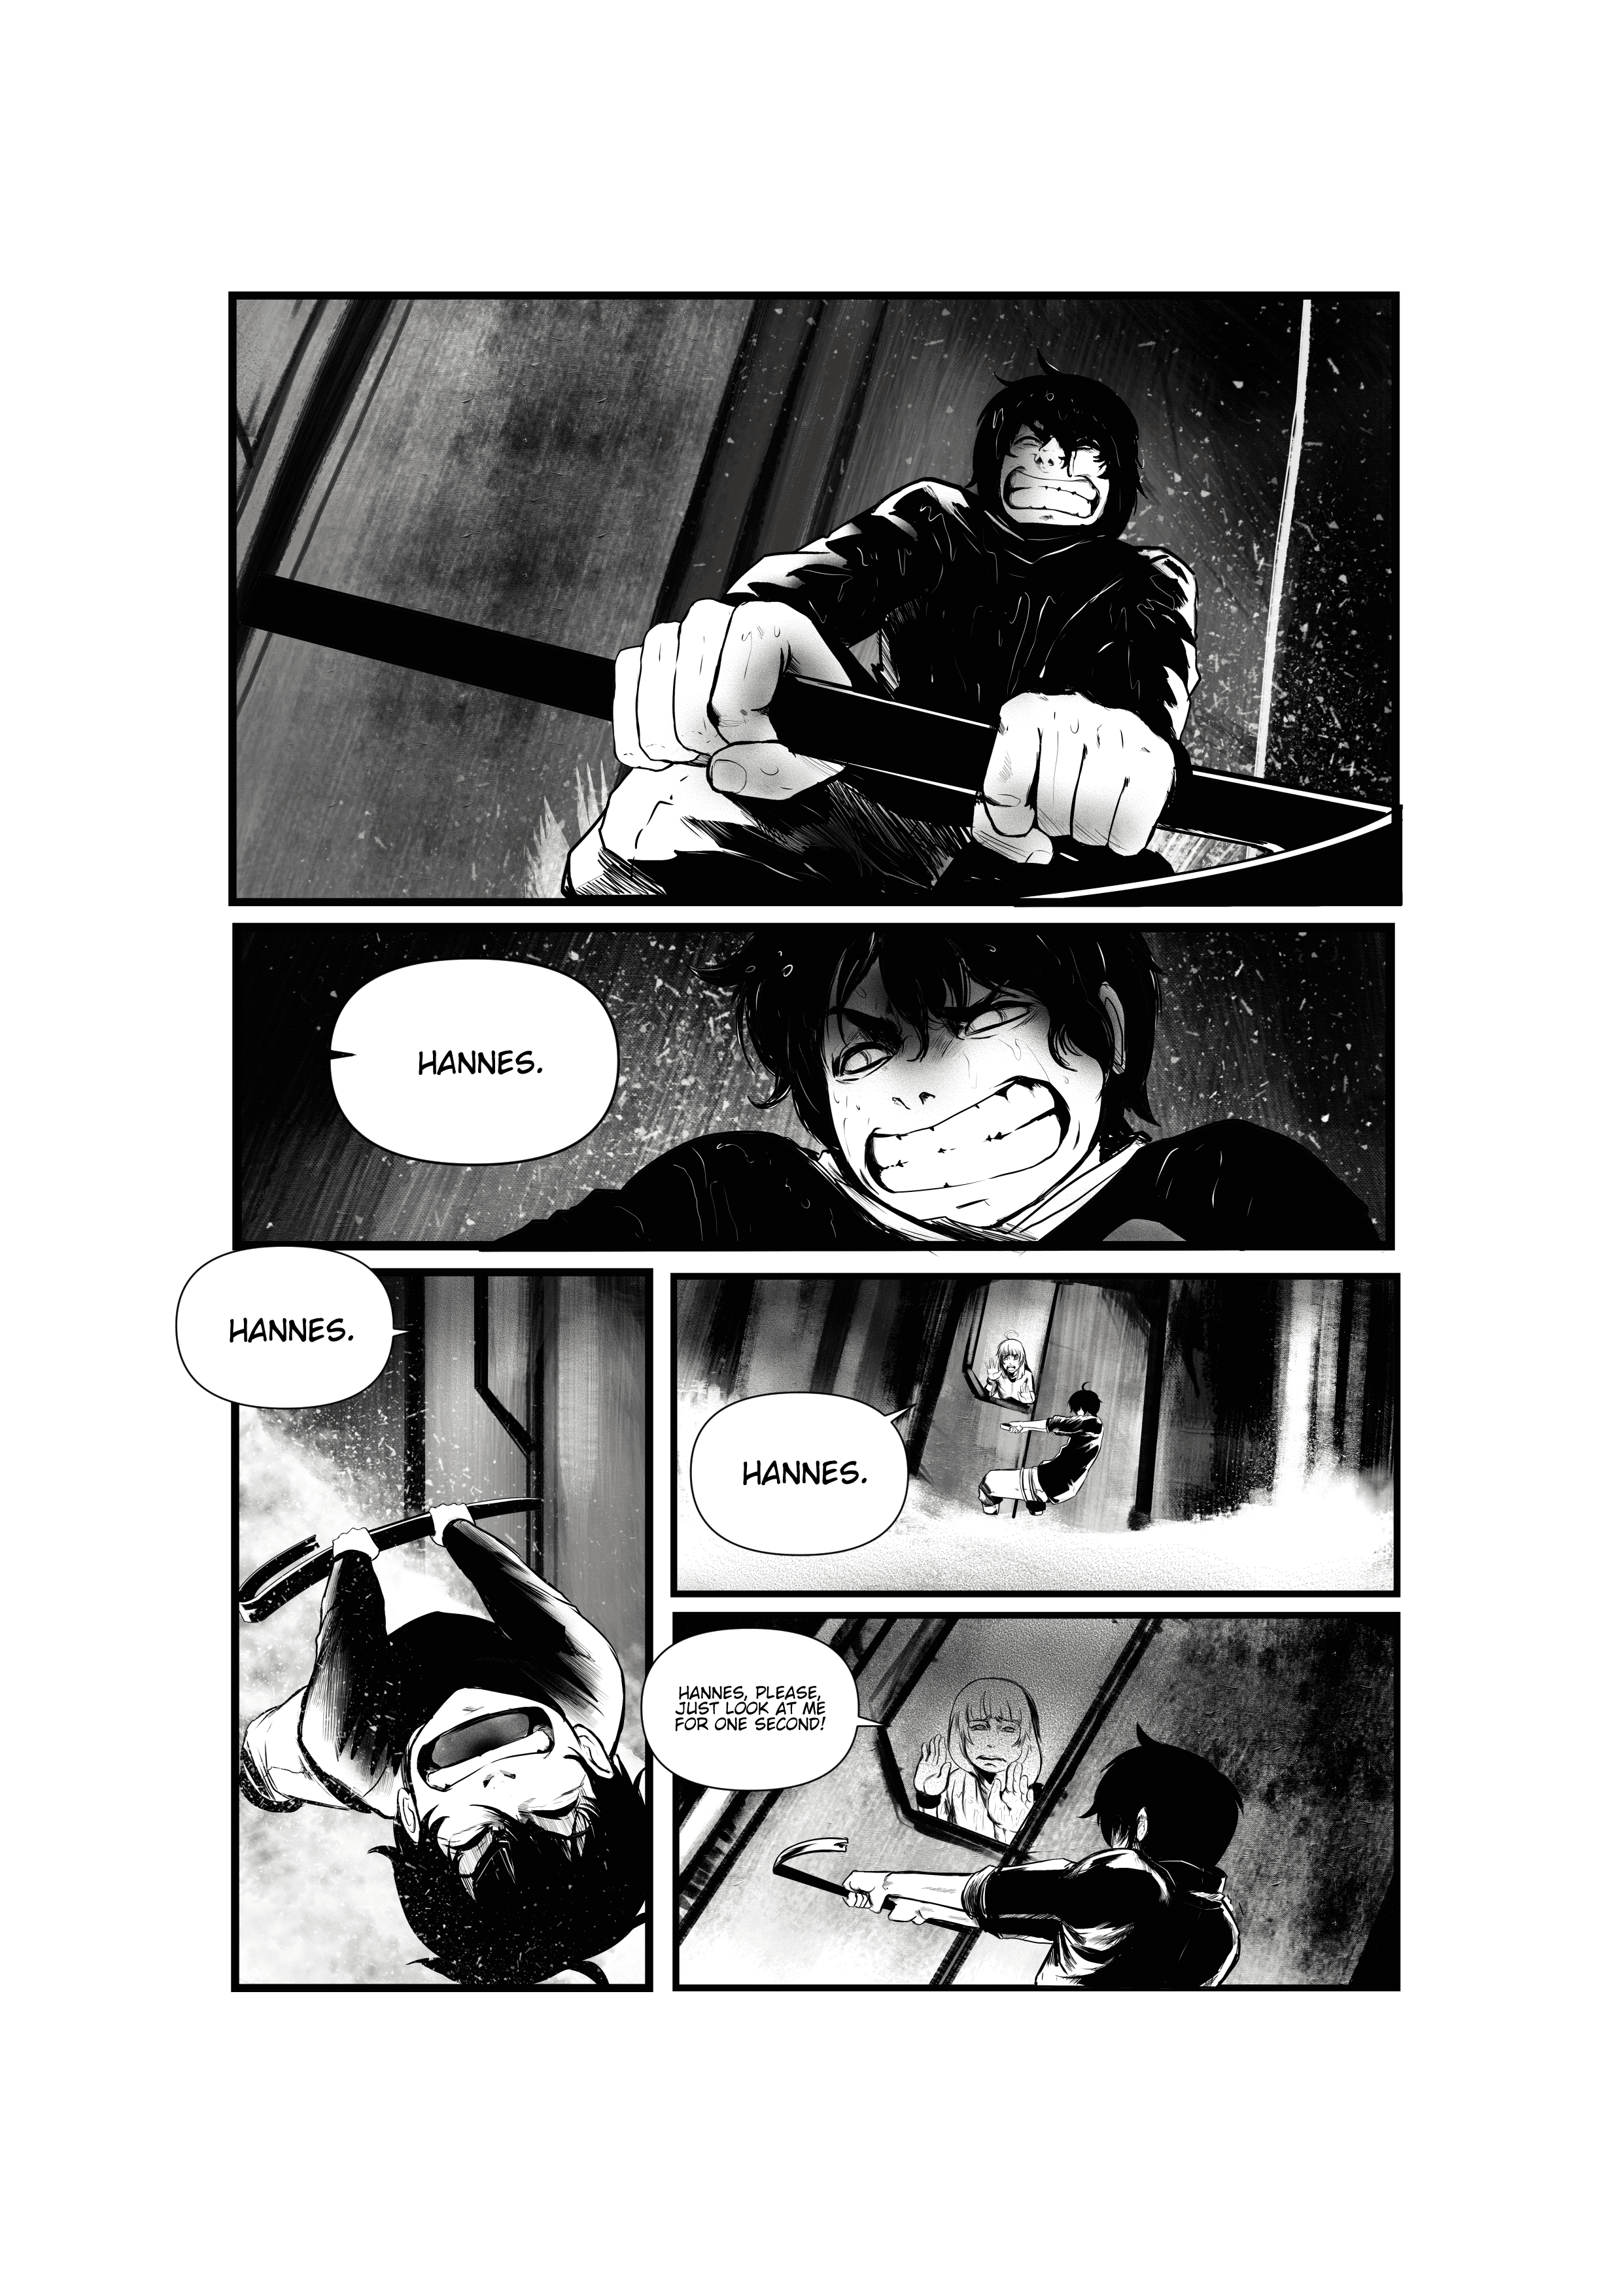 How We End - Page 3